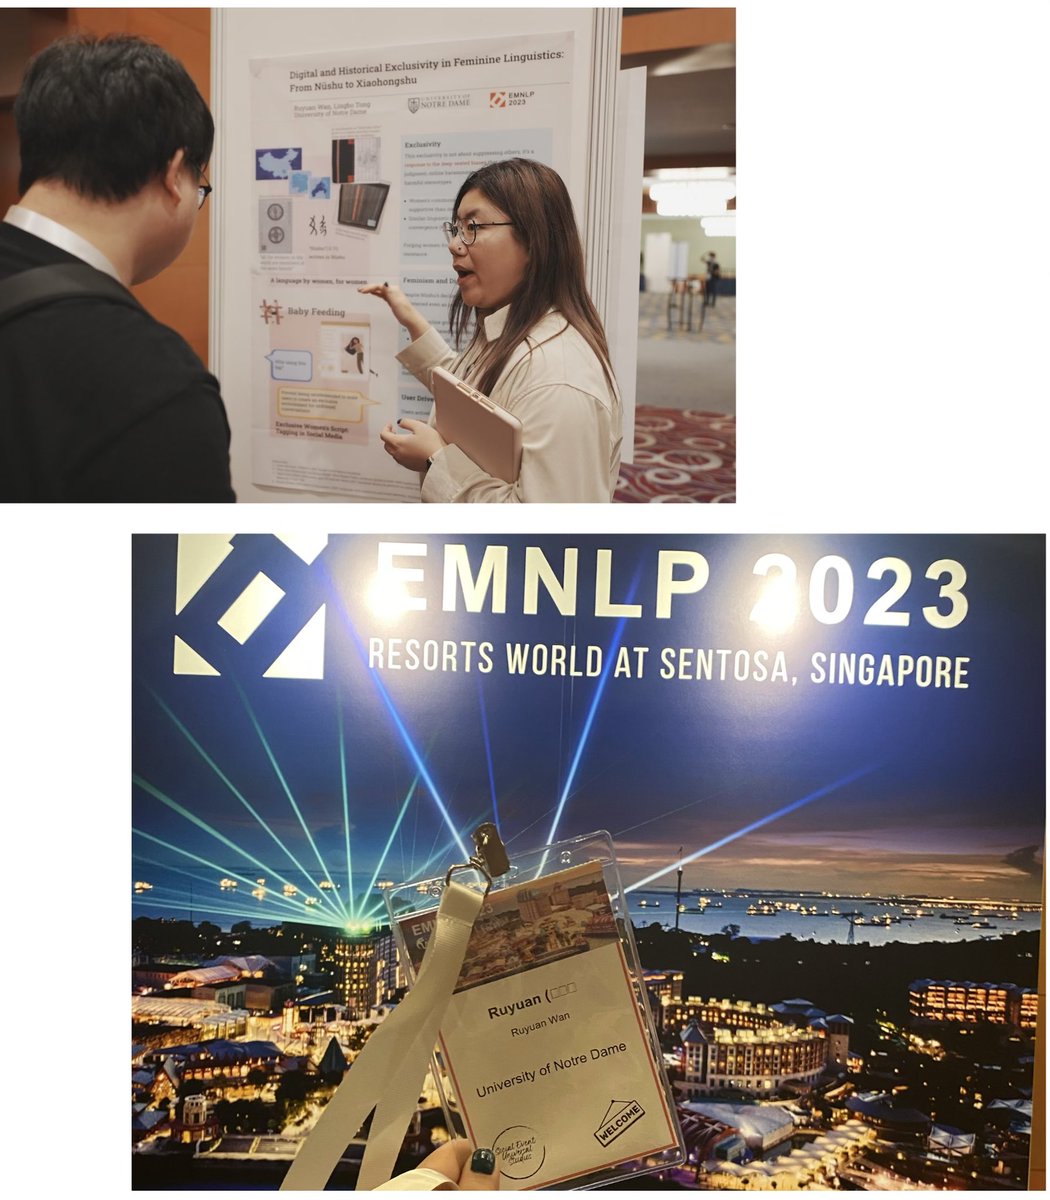 #EMNLP2023 Honored to present our poster at @WiNLPWorkshop today! Looking forward to meeting friends and chatting about HCI + NLP research @morlikow and I are also organizing an informal lunch for researchers working on subjectivity and disagreement Stay tuned for more details🍽️!